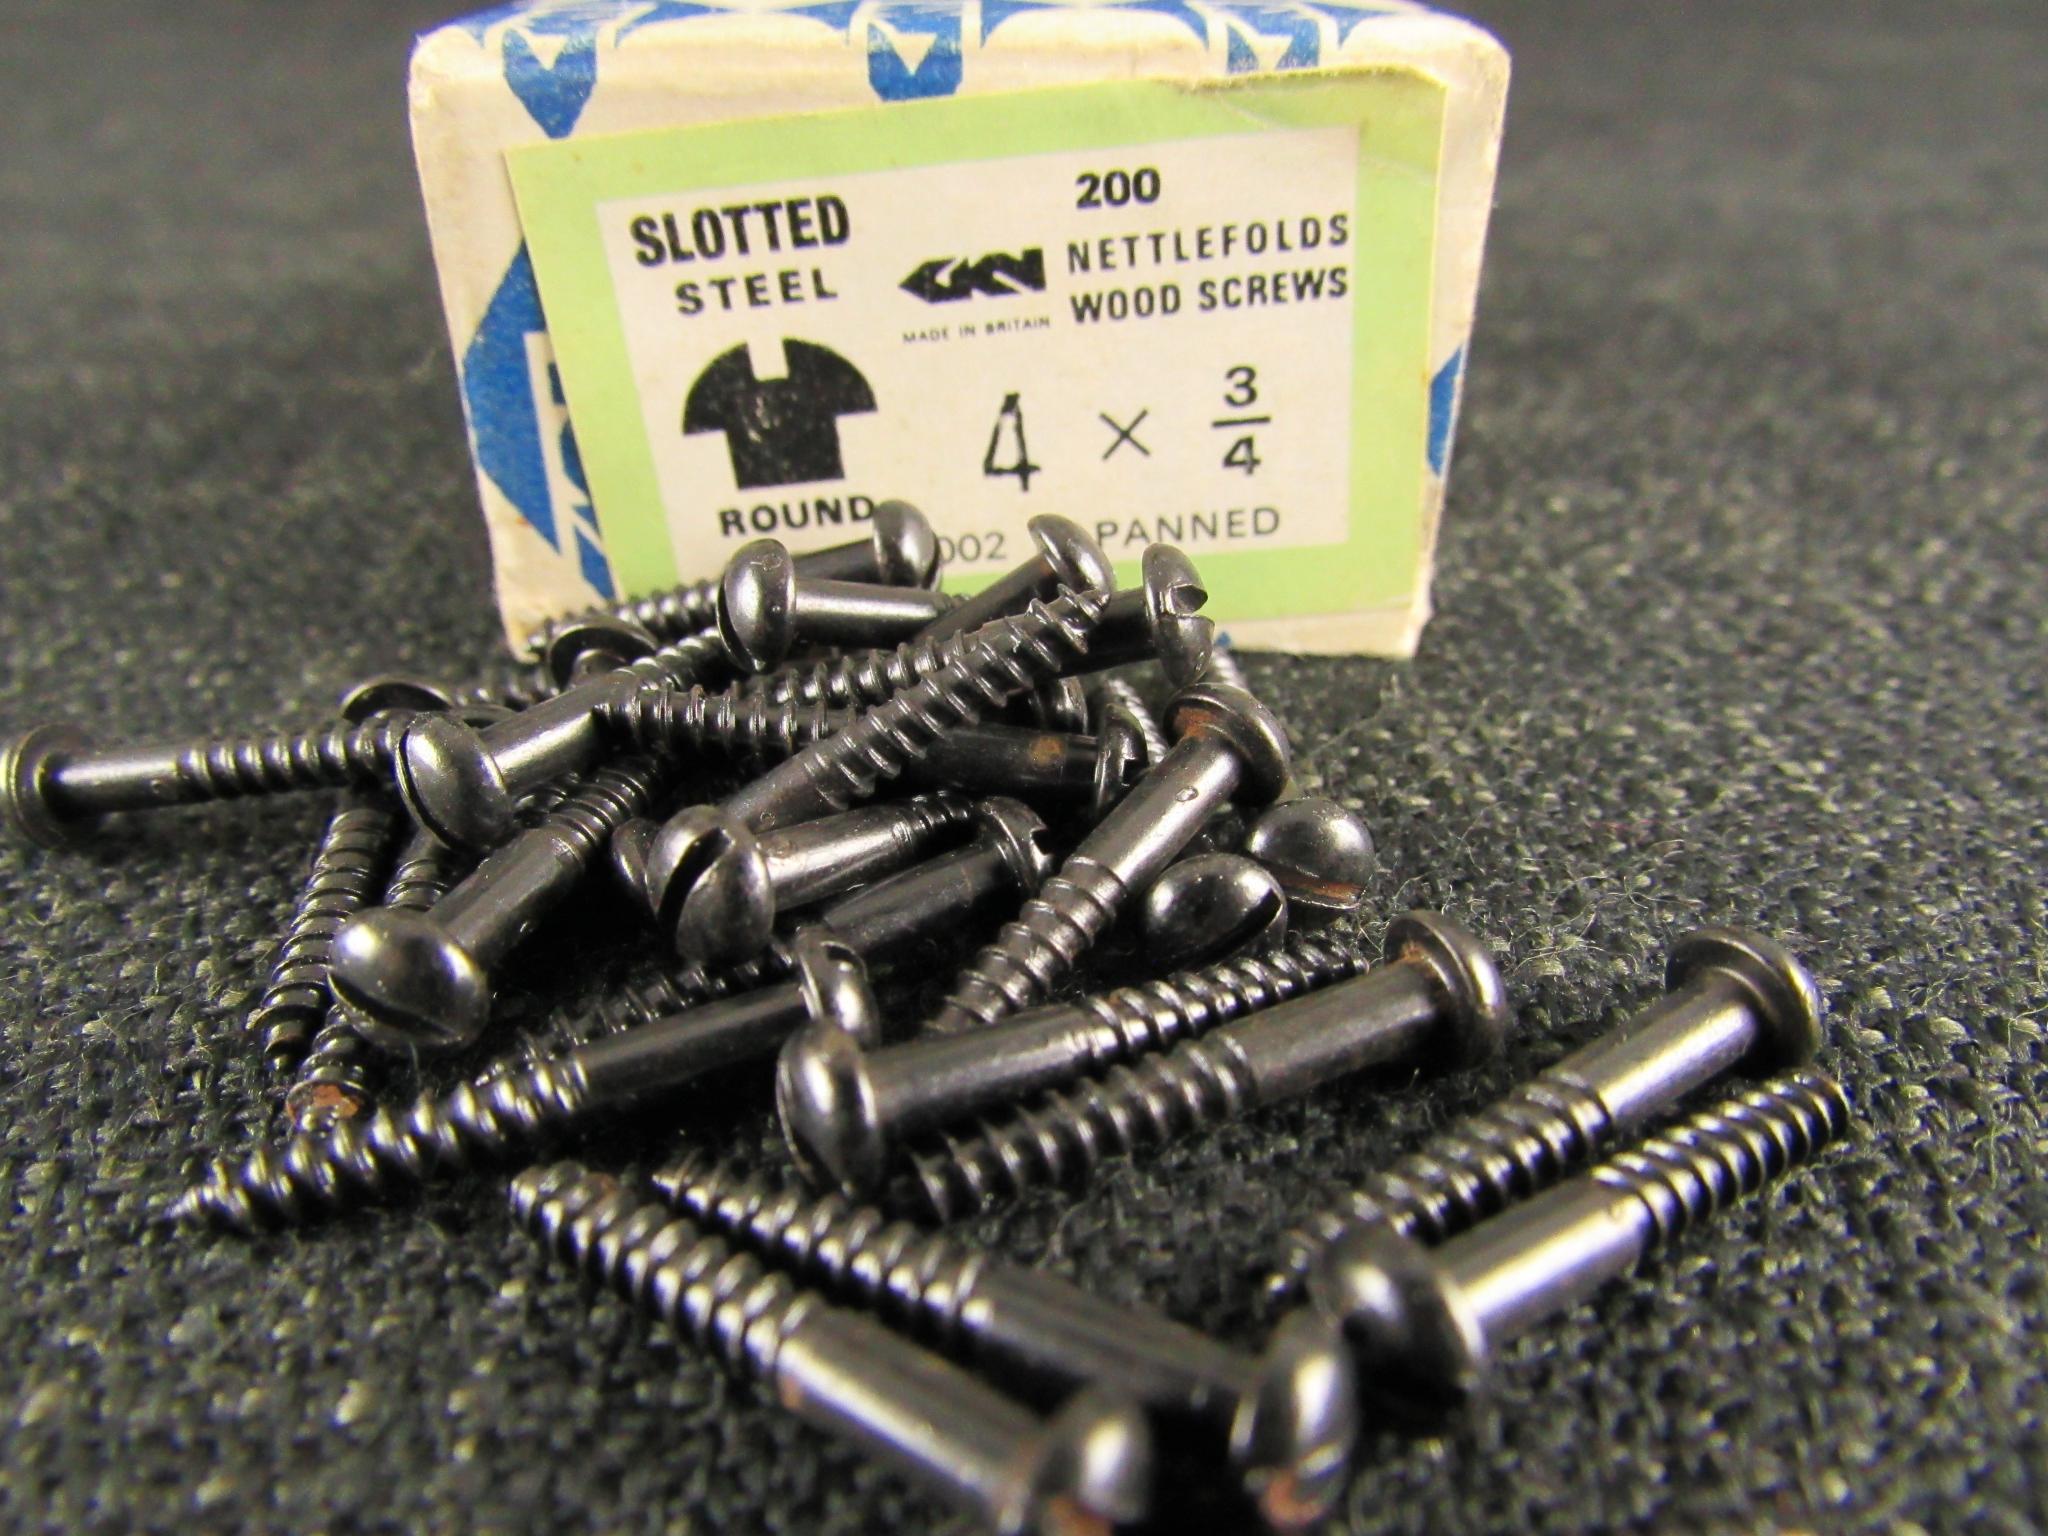 NETTLEFOLDS 4 x 1/2 Slotted Steel Round Japanned Screws (Qty 25)